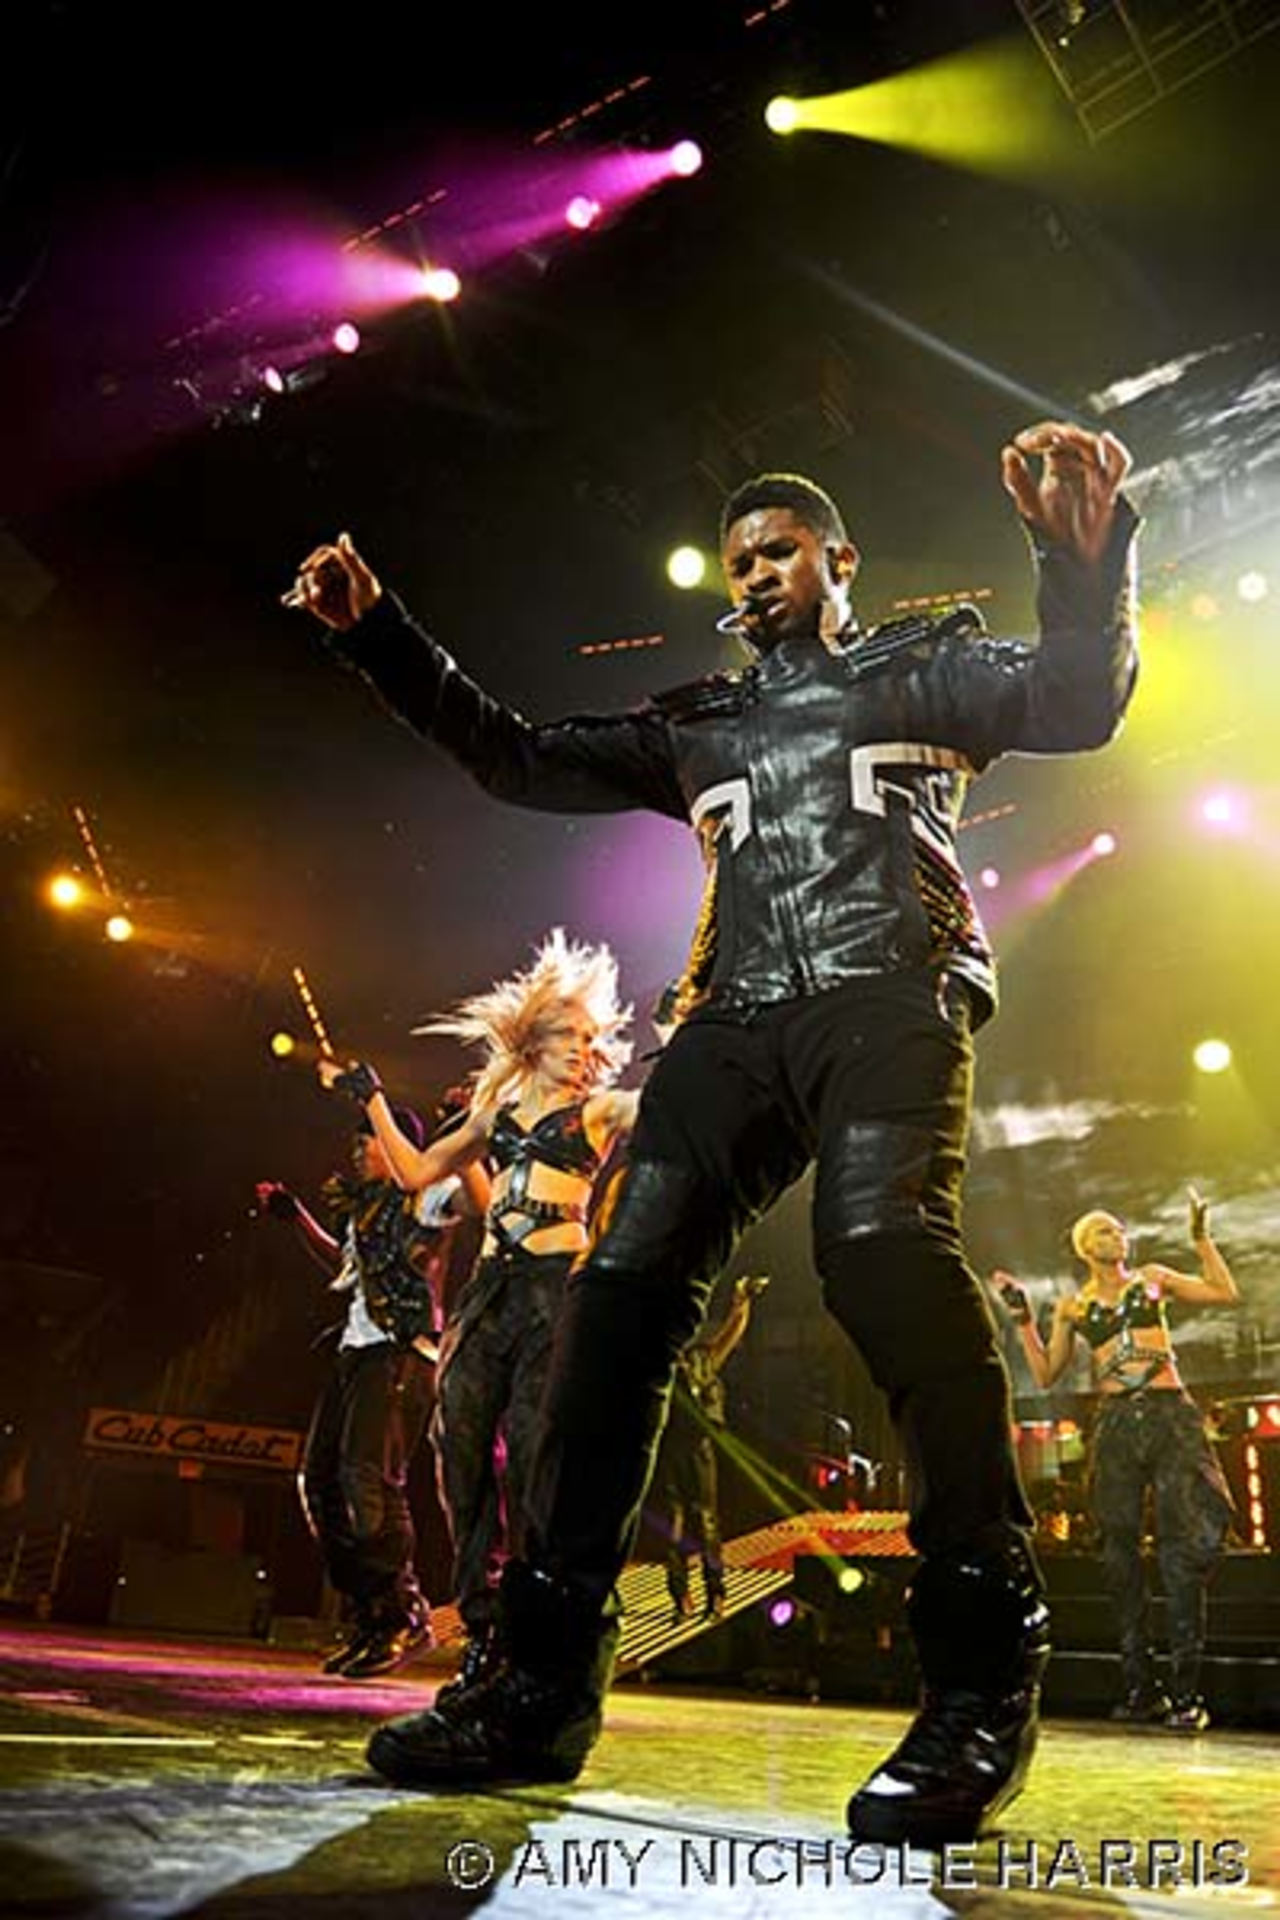 Usher in Cleveland on the "OMG Tour"